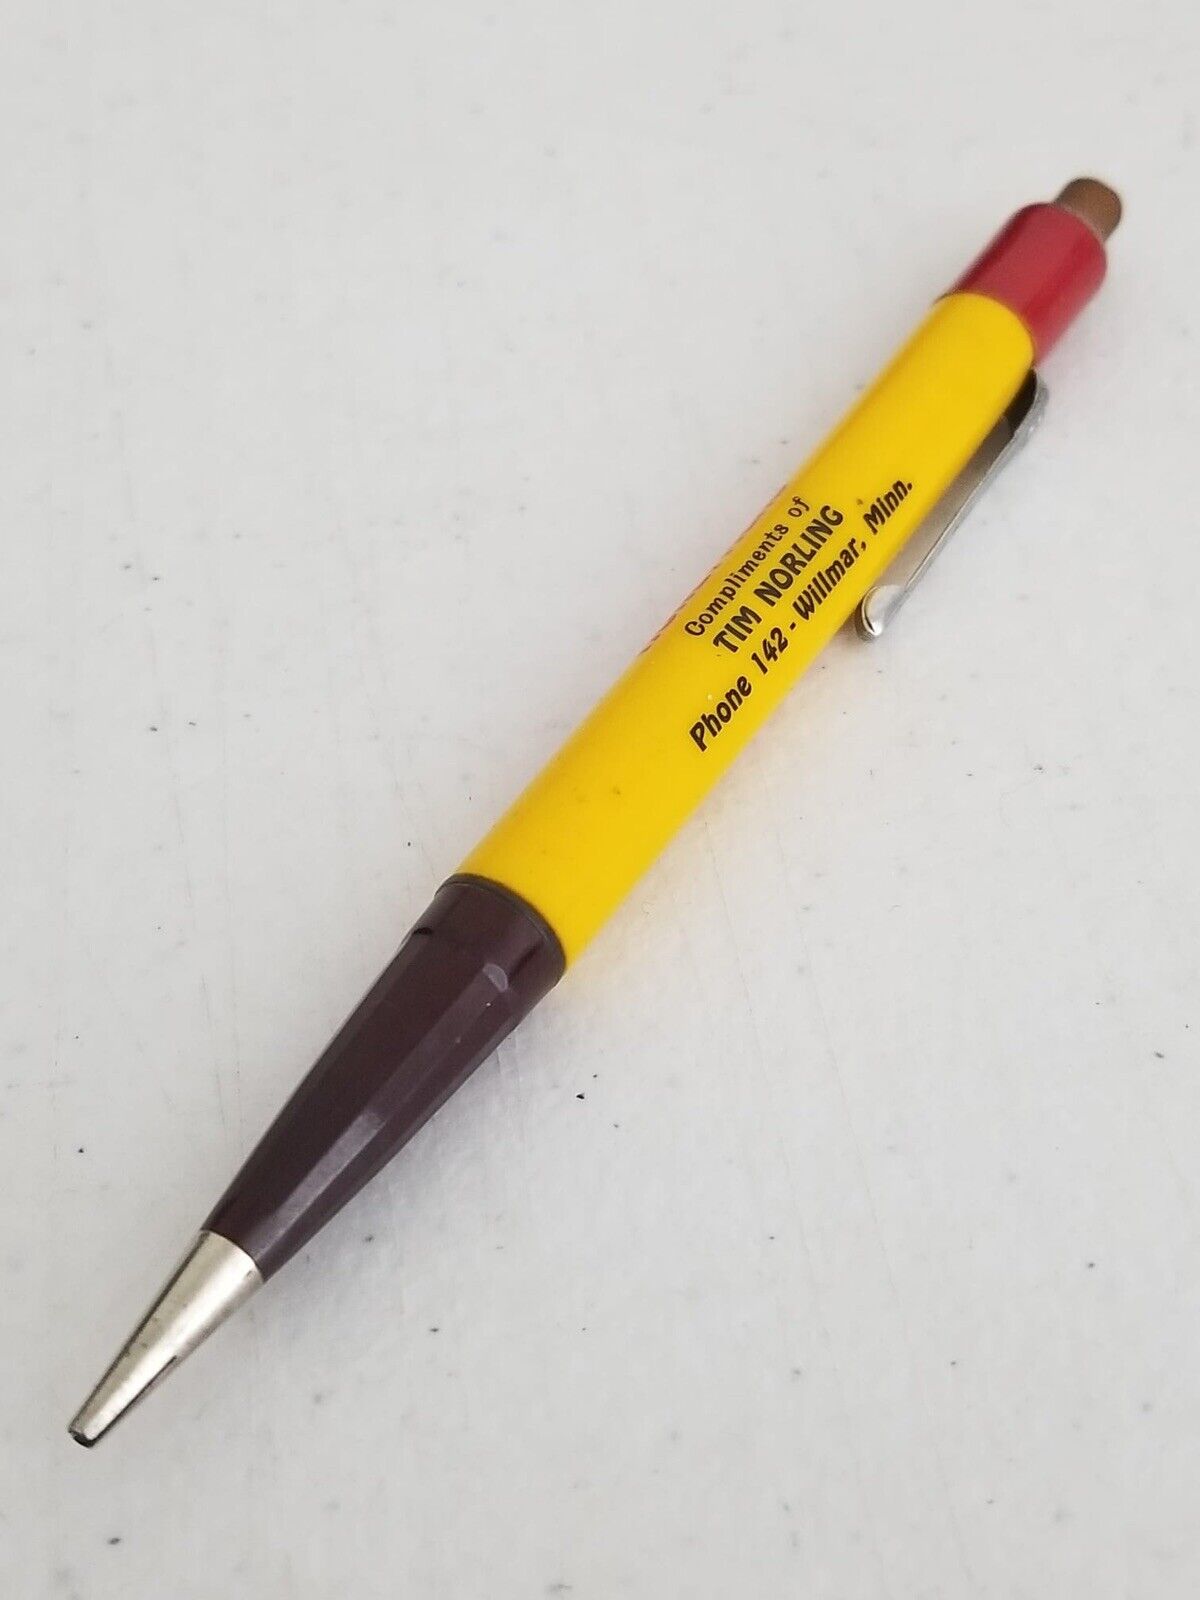 Vintage Ritepoint Mechanical Pencil - Honeymead Creamery Co-op Collectible Writing Tool - TreasuTiques